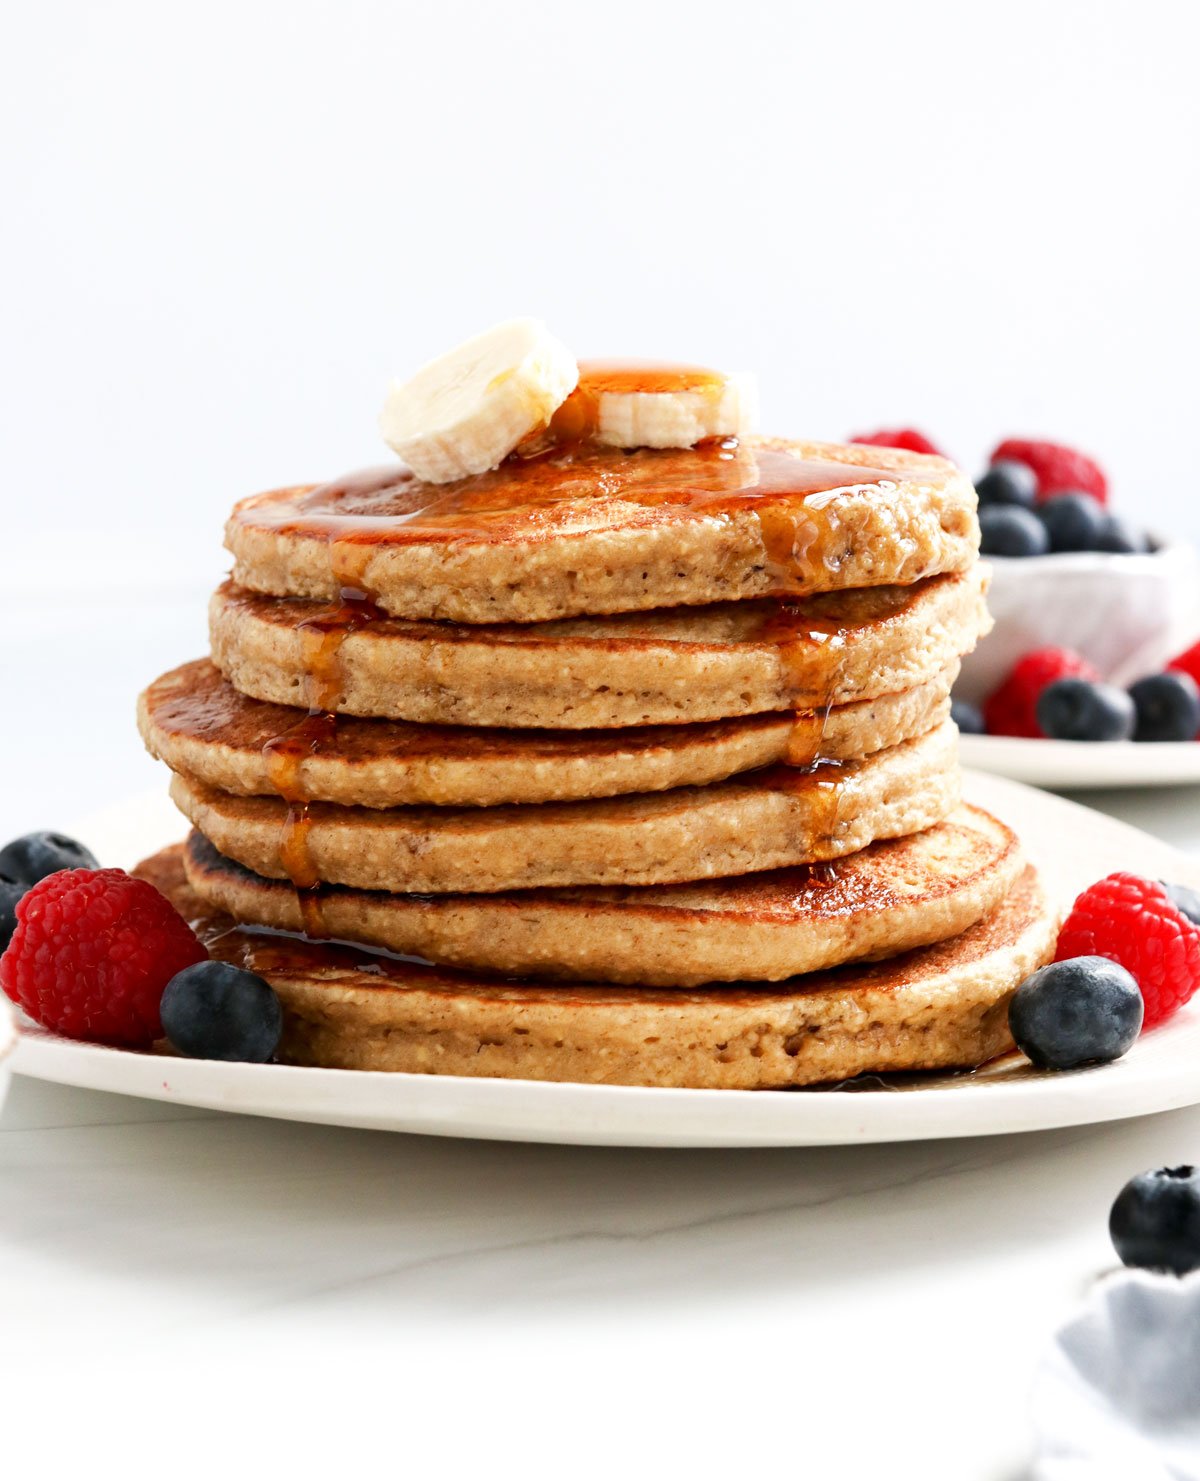 banana oatmeal pancakes stacked with maple syrup on top.